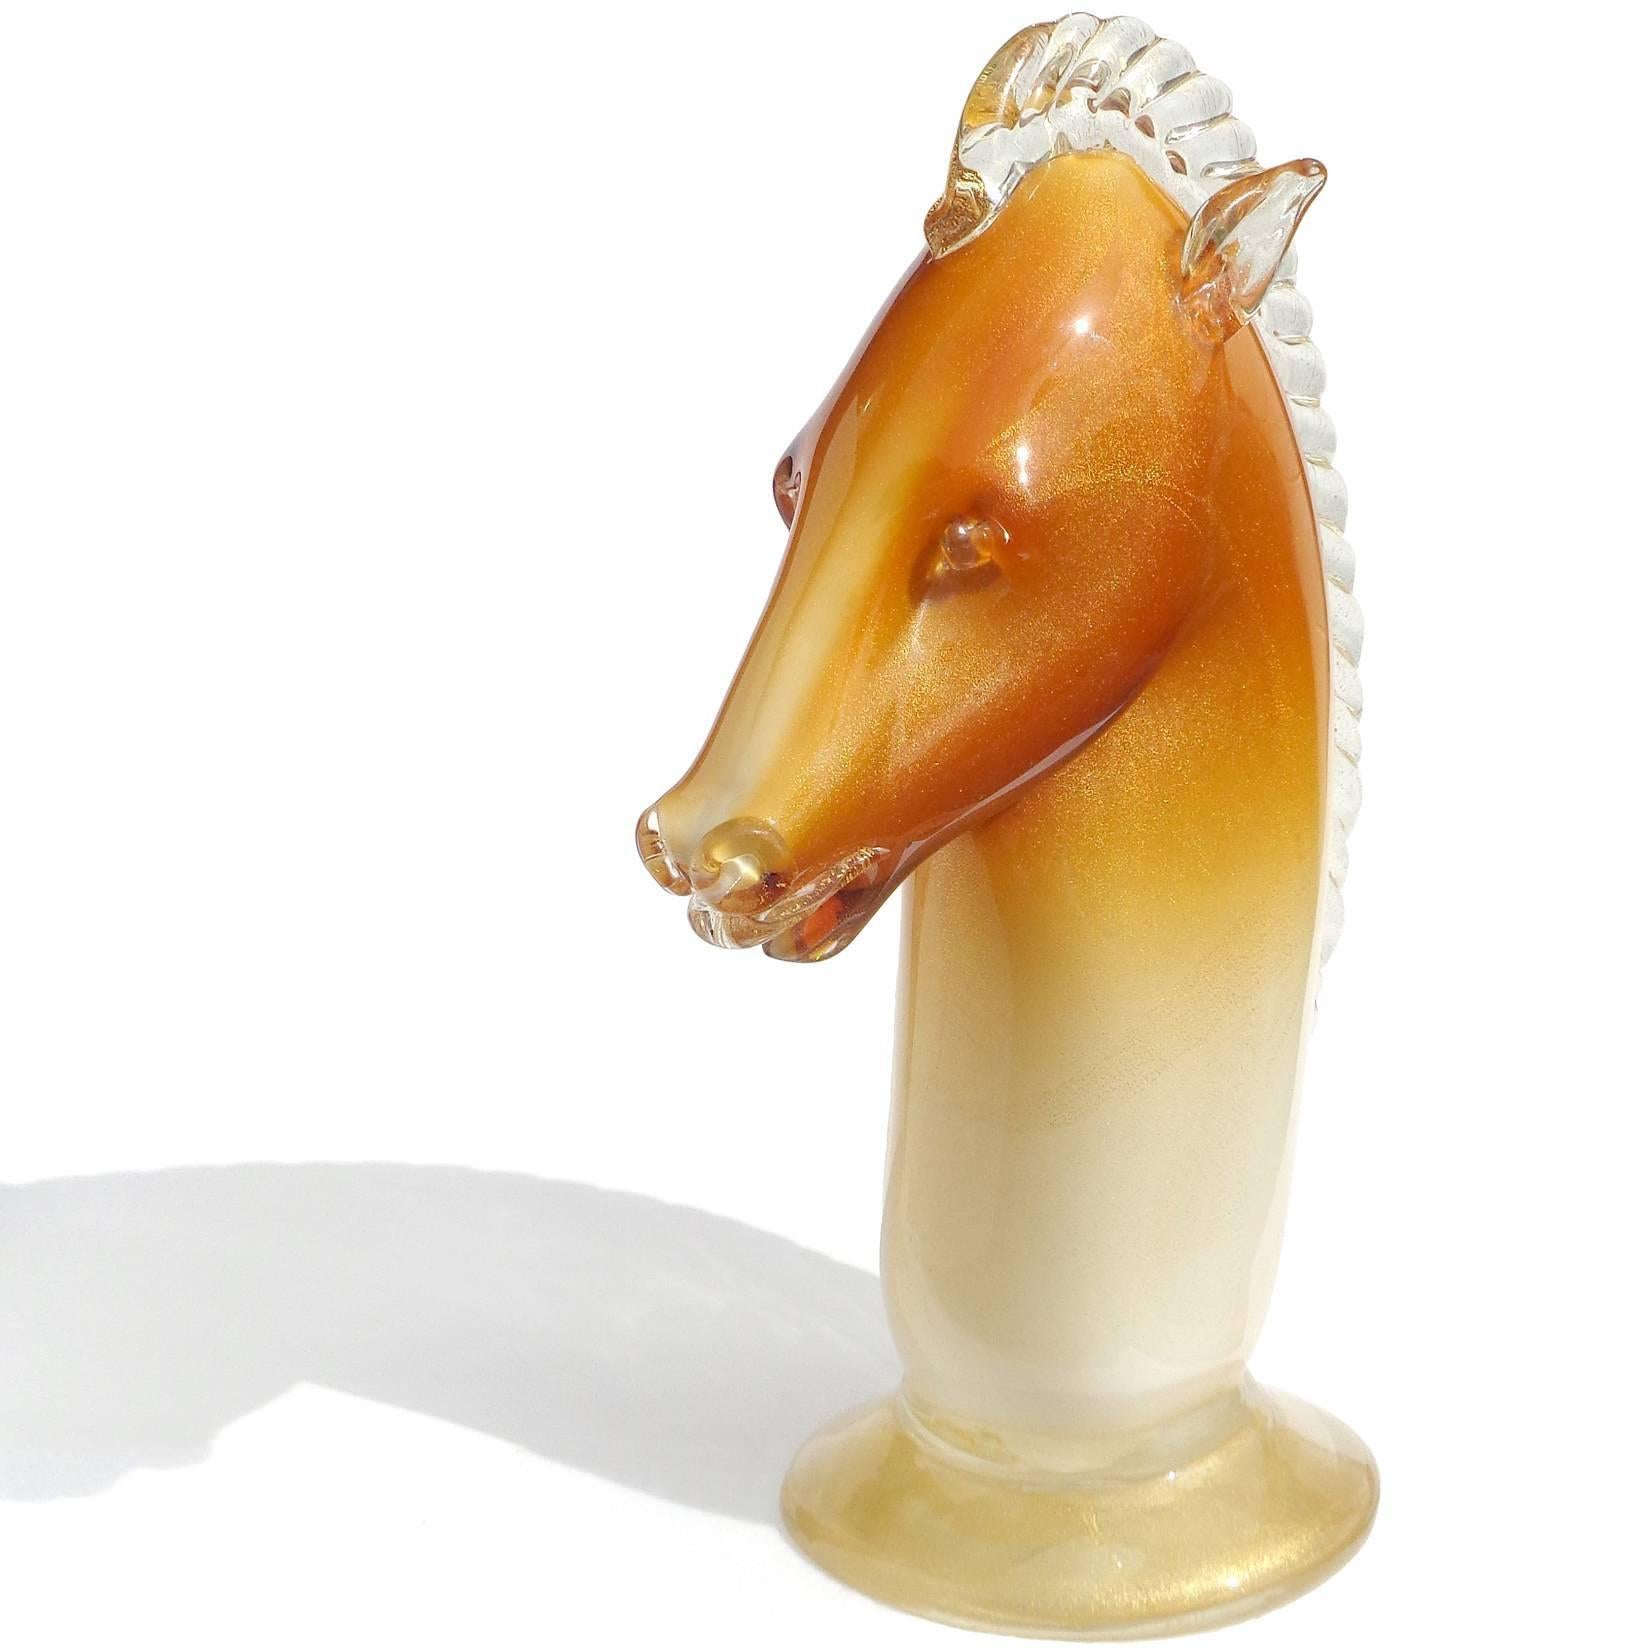 Beautiful, extra large, vintage Murano hand blown orange to white and gold flecks Italian art glass horse head / knight chess piece sculpture. Attributed to Master glass artist and designer Alfredo Barbini, for the Salviati company. The horse head